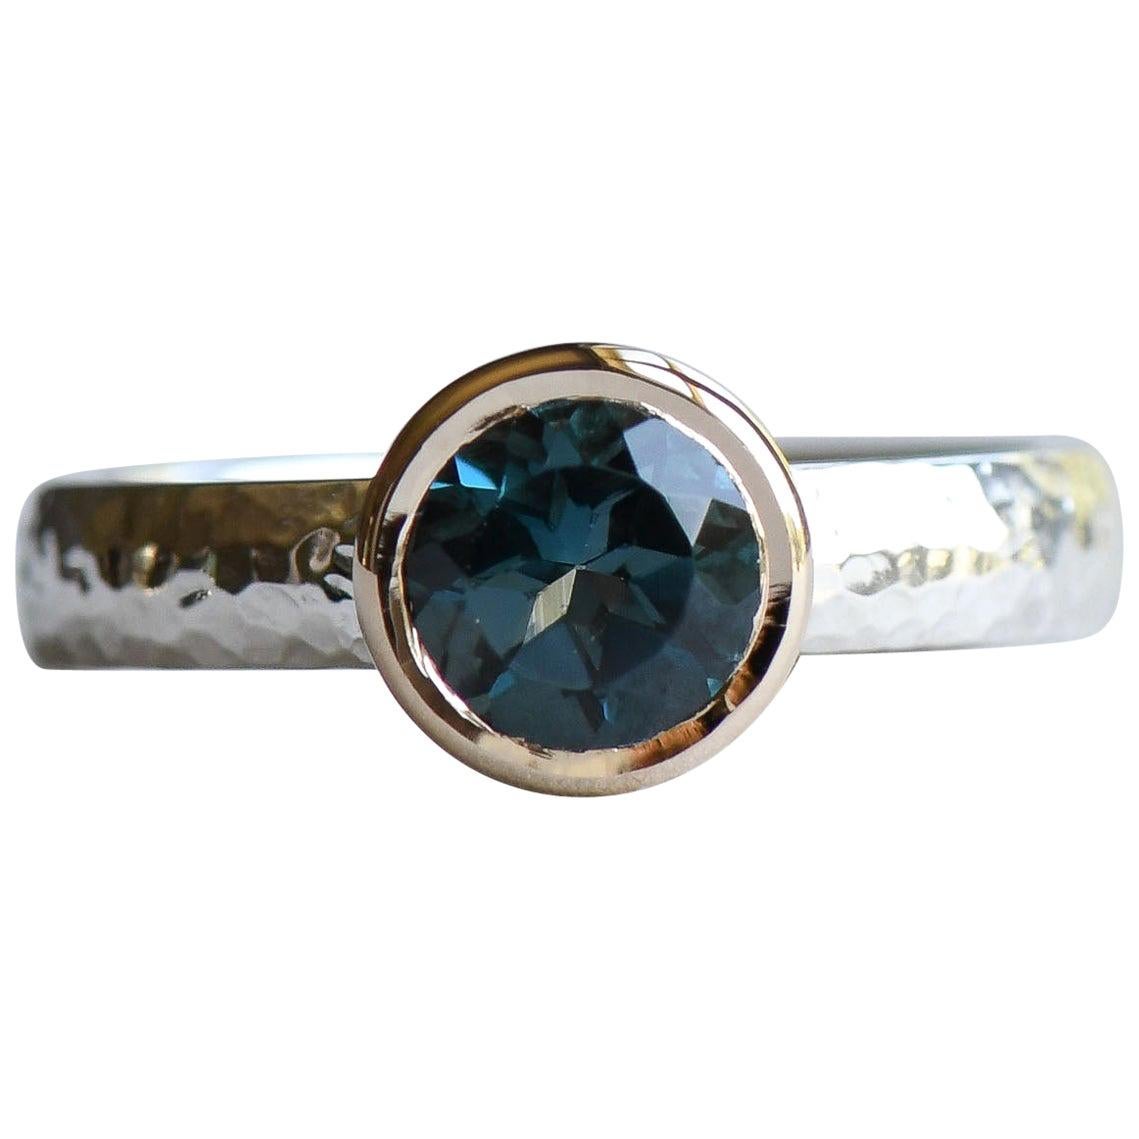 For Sale:  Two Tone Hammered Ring, London Topaz Ring, 14k Bezel Gold with Sterling Silver